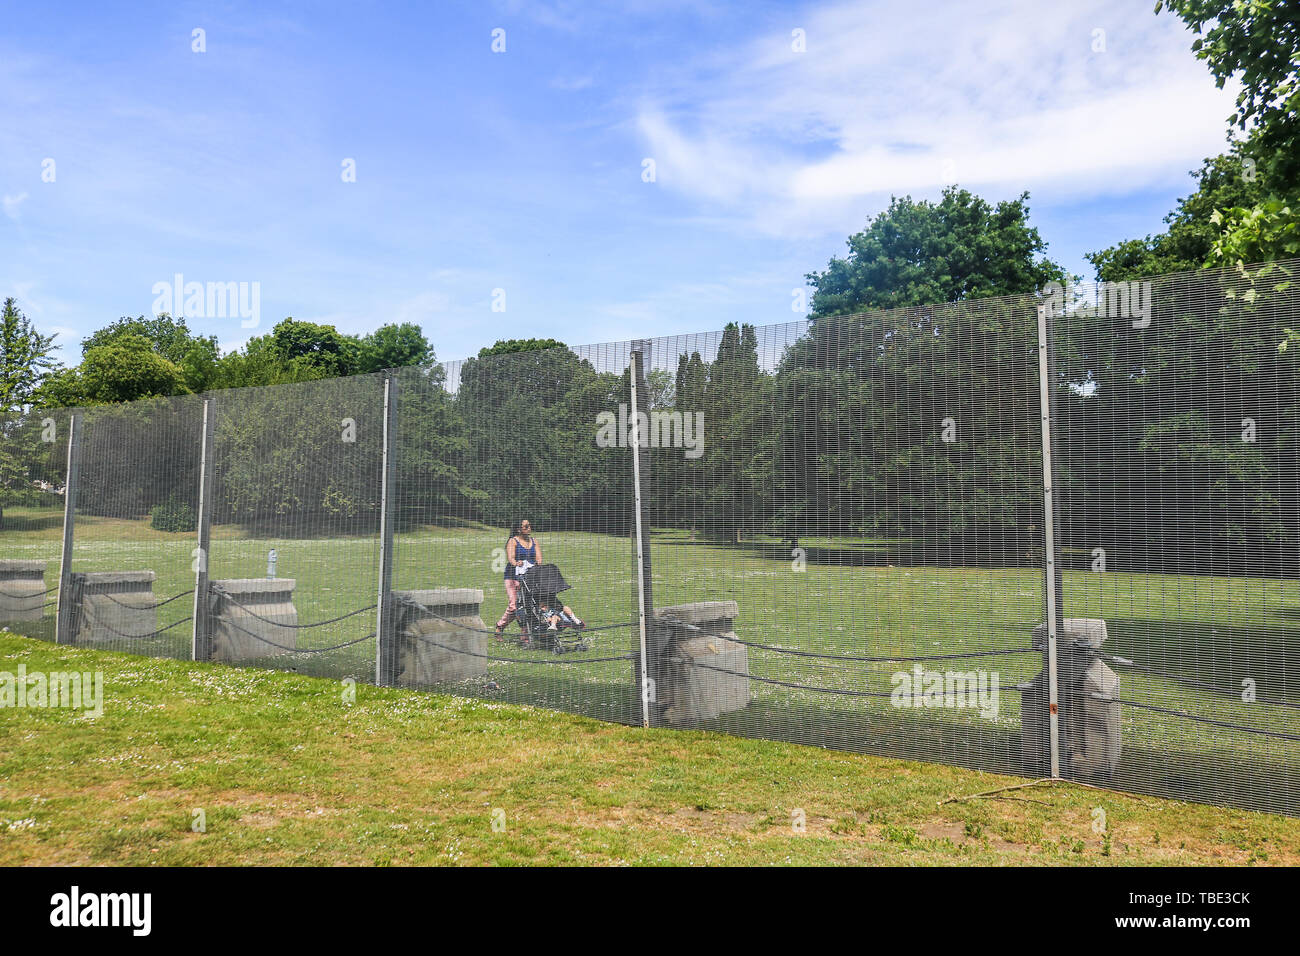 London UK. 1st June 2019. High steel  mesh security fences are erected around the perimeter of the American Ambassador's residence at Winfield House in Regent's  Park ahead of the State Visit of US President Donald Trump London UK. 1st June 2019. The minaret of  Regent's Park mosque seen next to security fences which have been installed around Winfield House residence of the Ambassador of the United States of America in Regent's Park ahead of the State Visit of President Donald Trump Credit: amer ghazzal/Alamy Live News Stock Photo